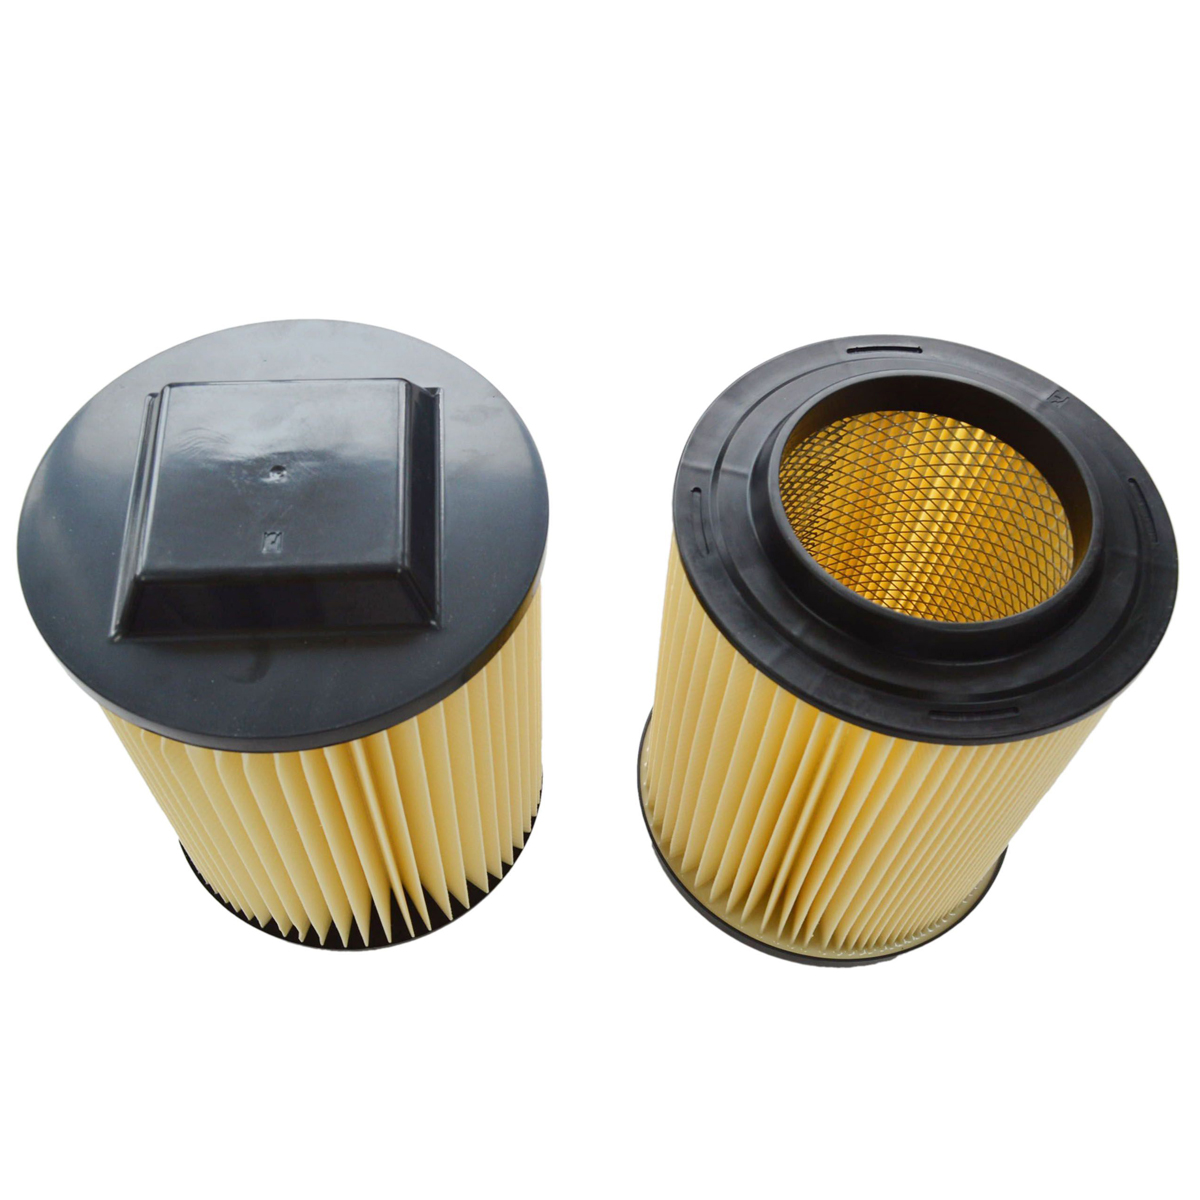 HEPA FILTER REPLACEMENT FOR SHOP VAC RIGID VF4000 VACUUM CLEANER HEPA FILTER PARTS ACCESSORIES